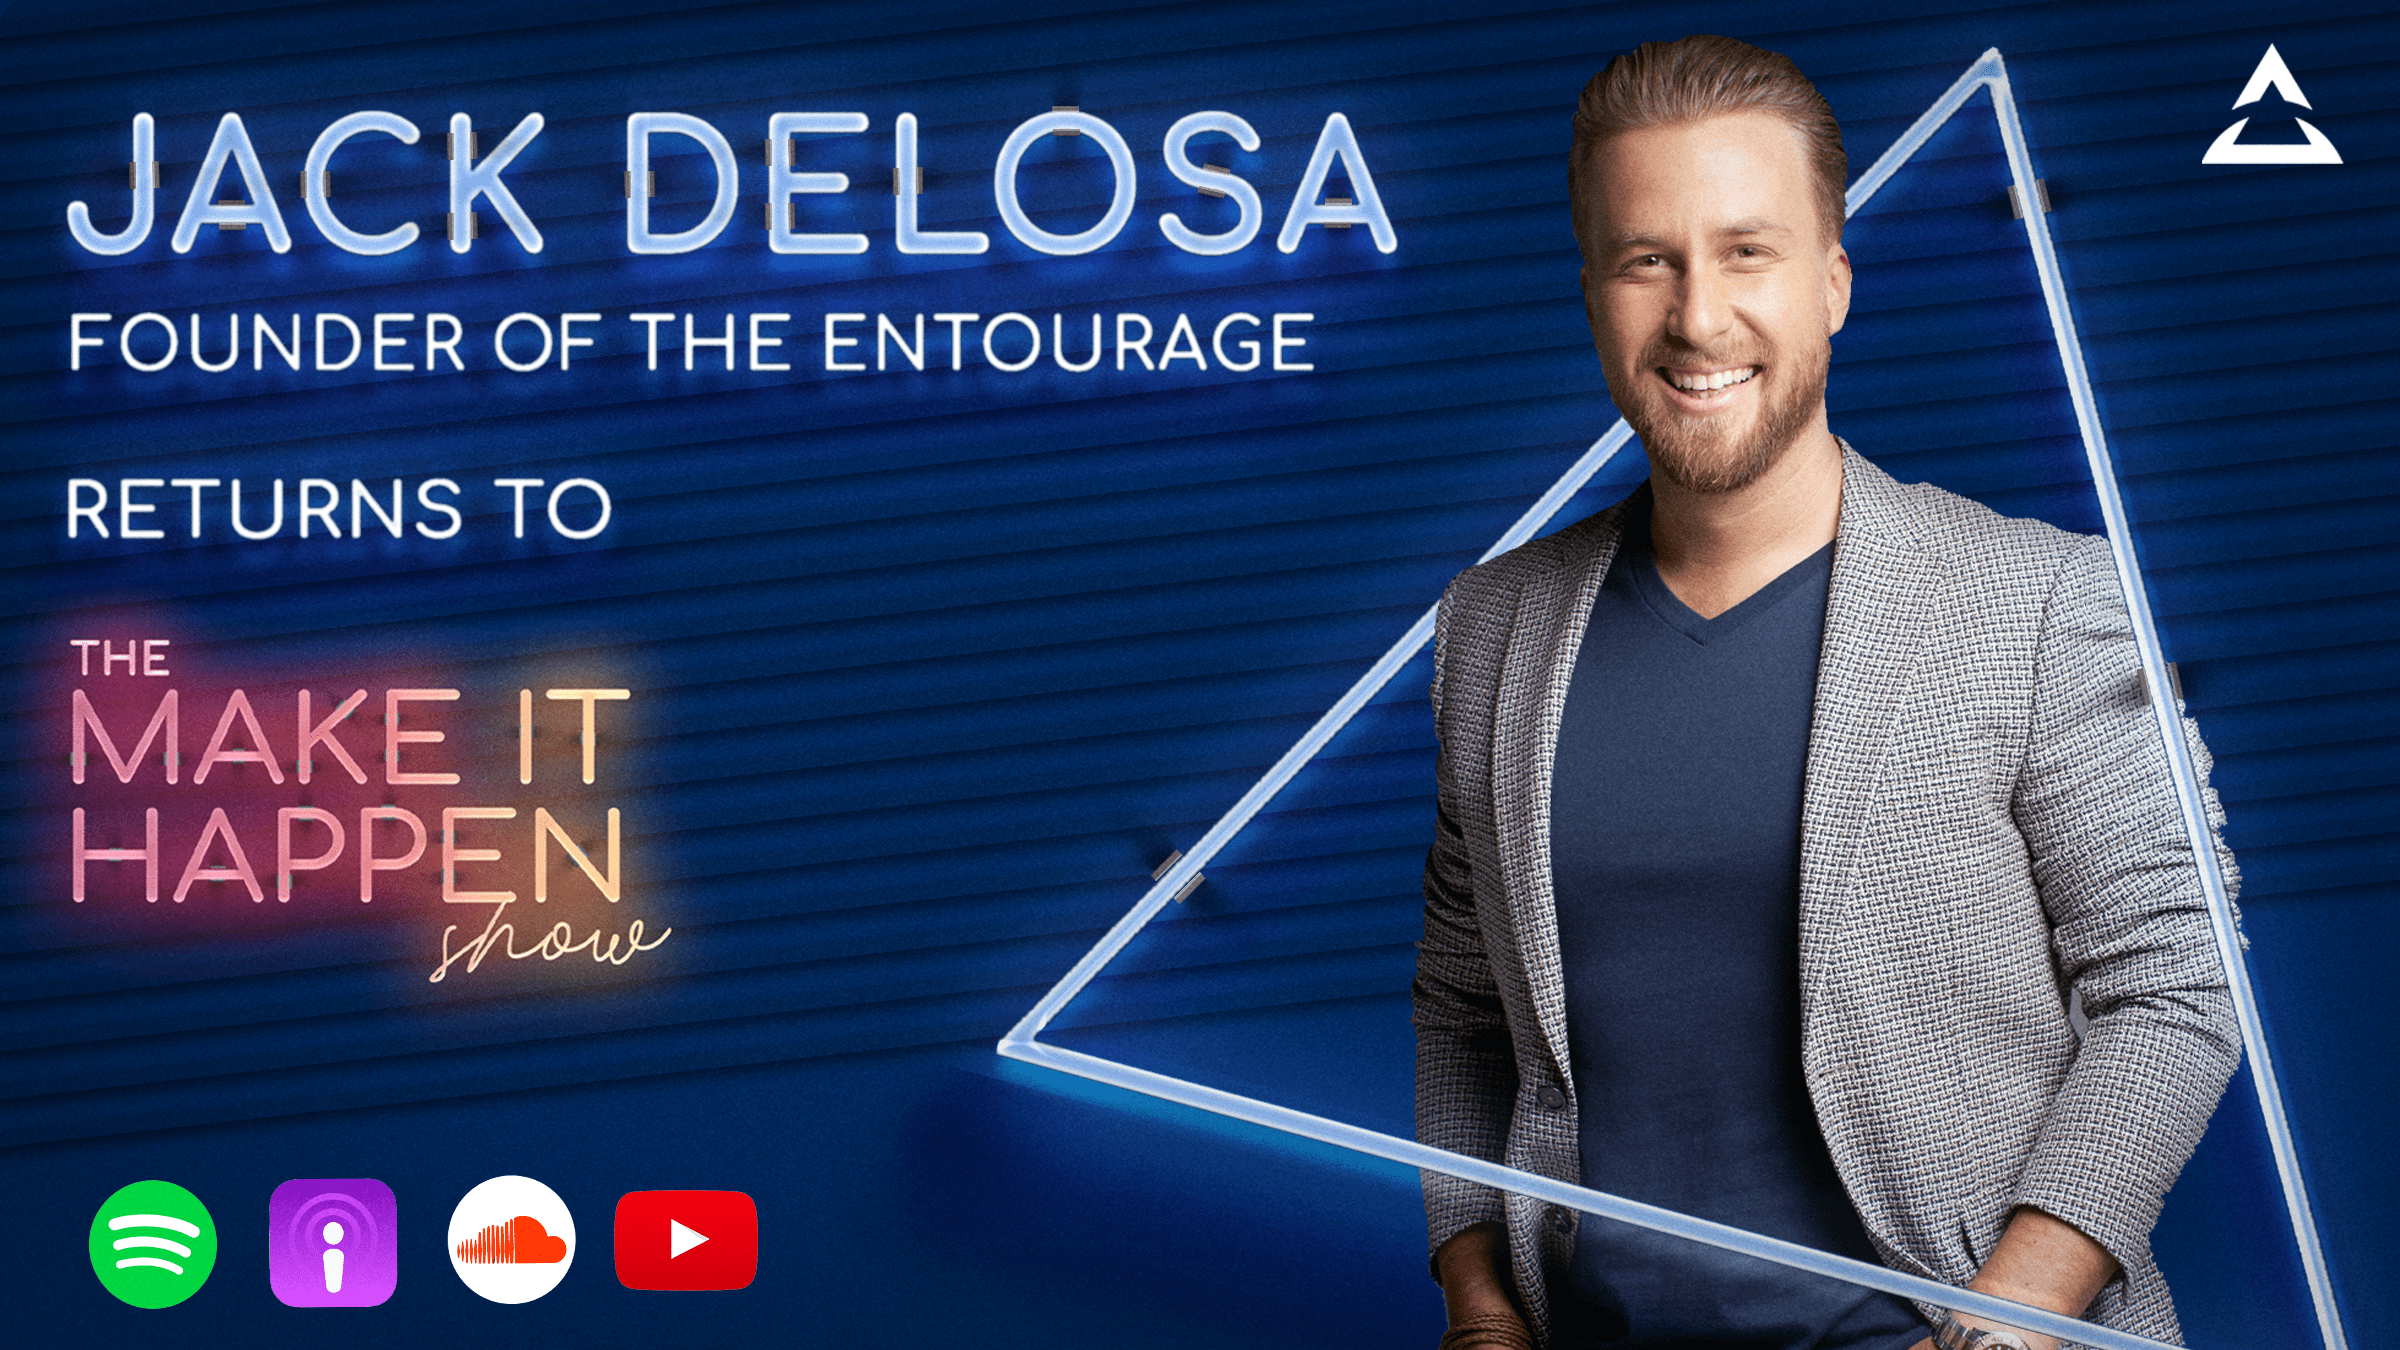 Jack Delosa, Founder of The Entourage returns to The Make It Happen Show